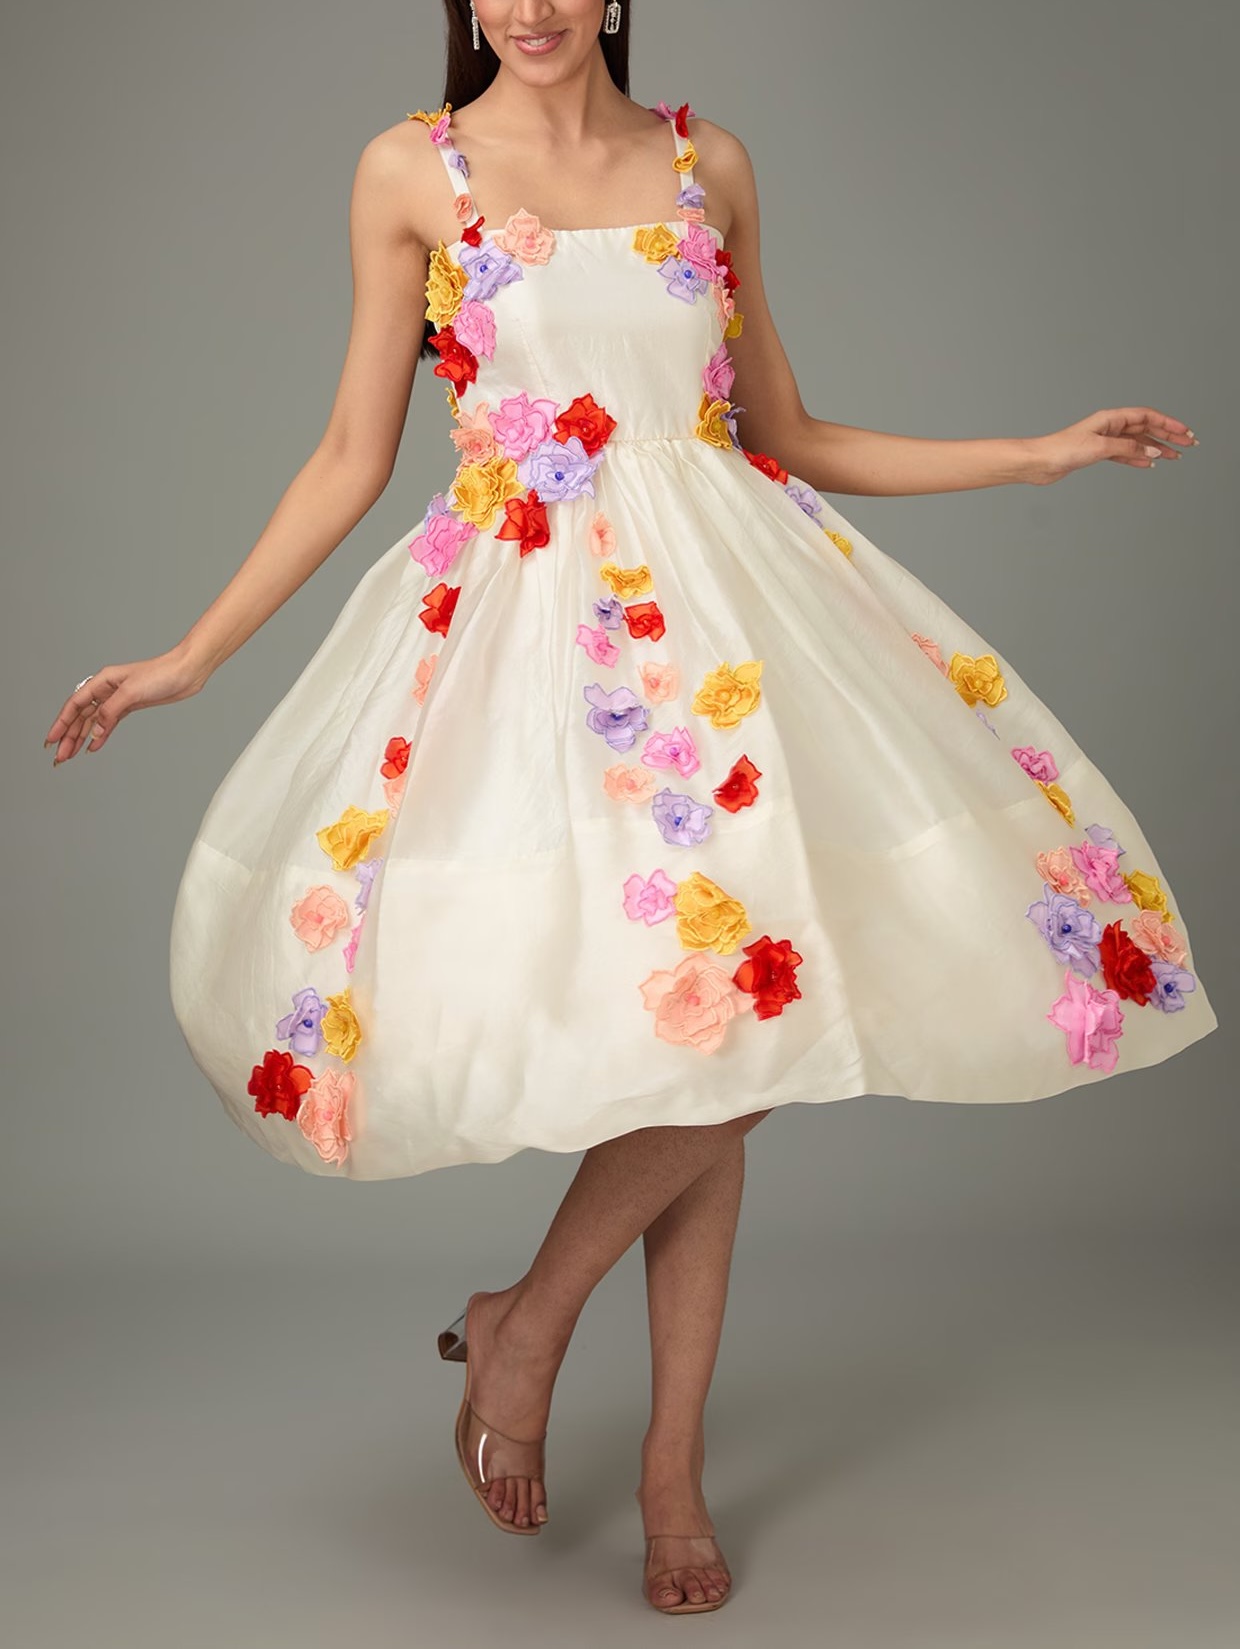 The Gallant Bella Floral Frock